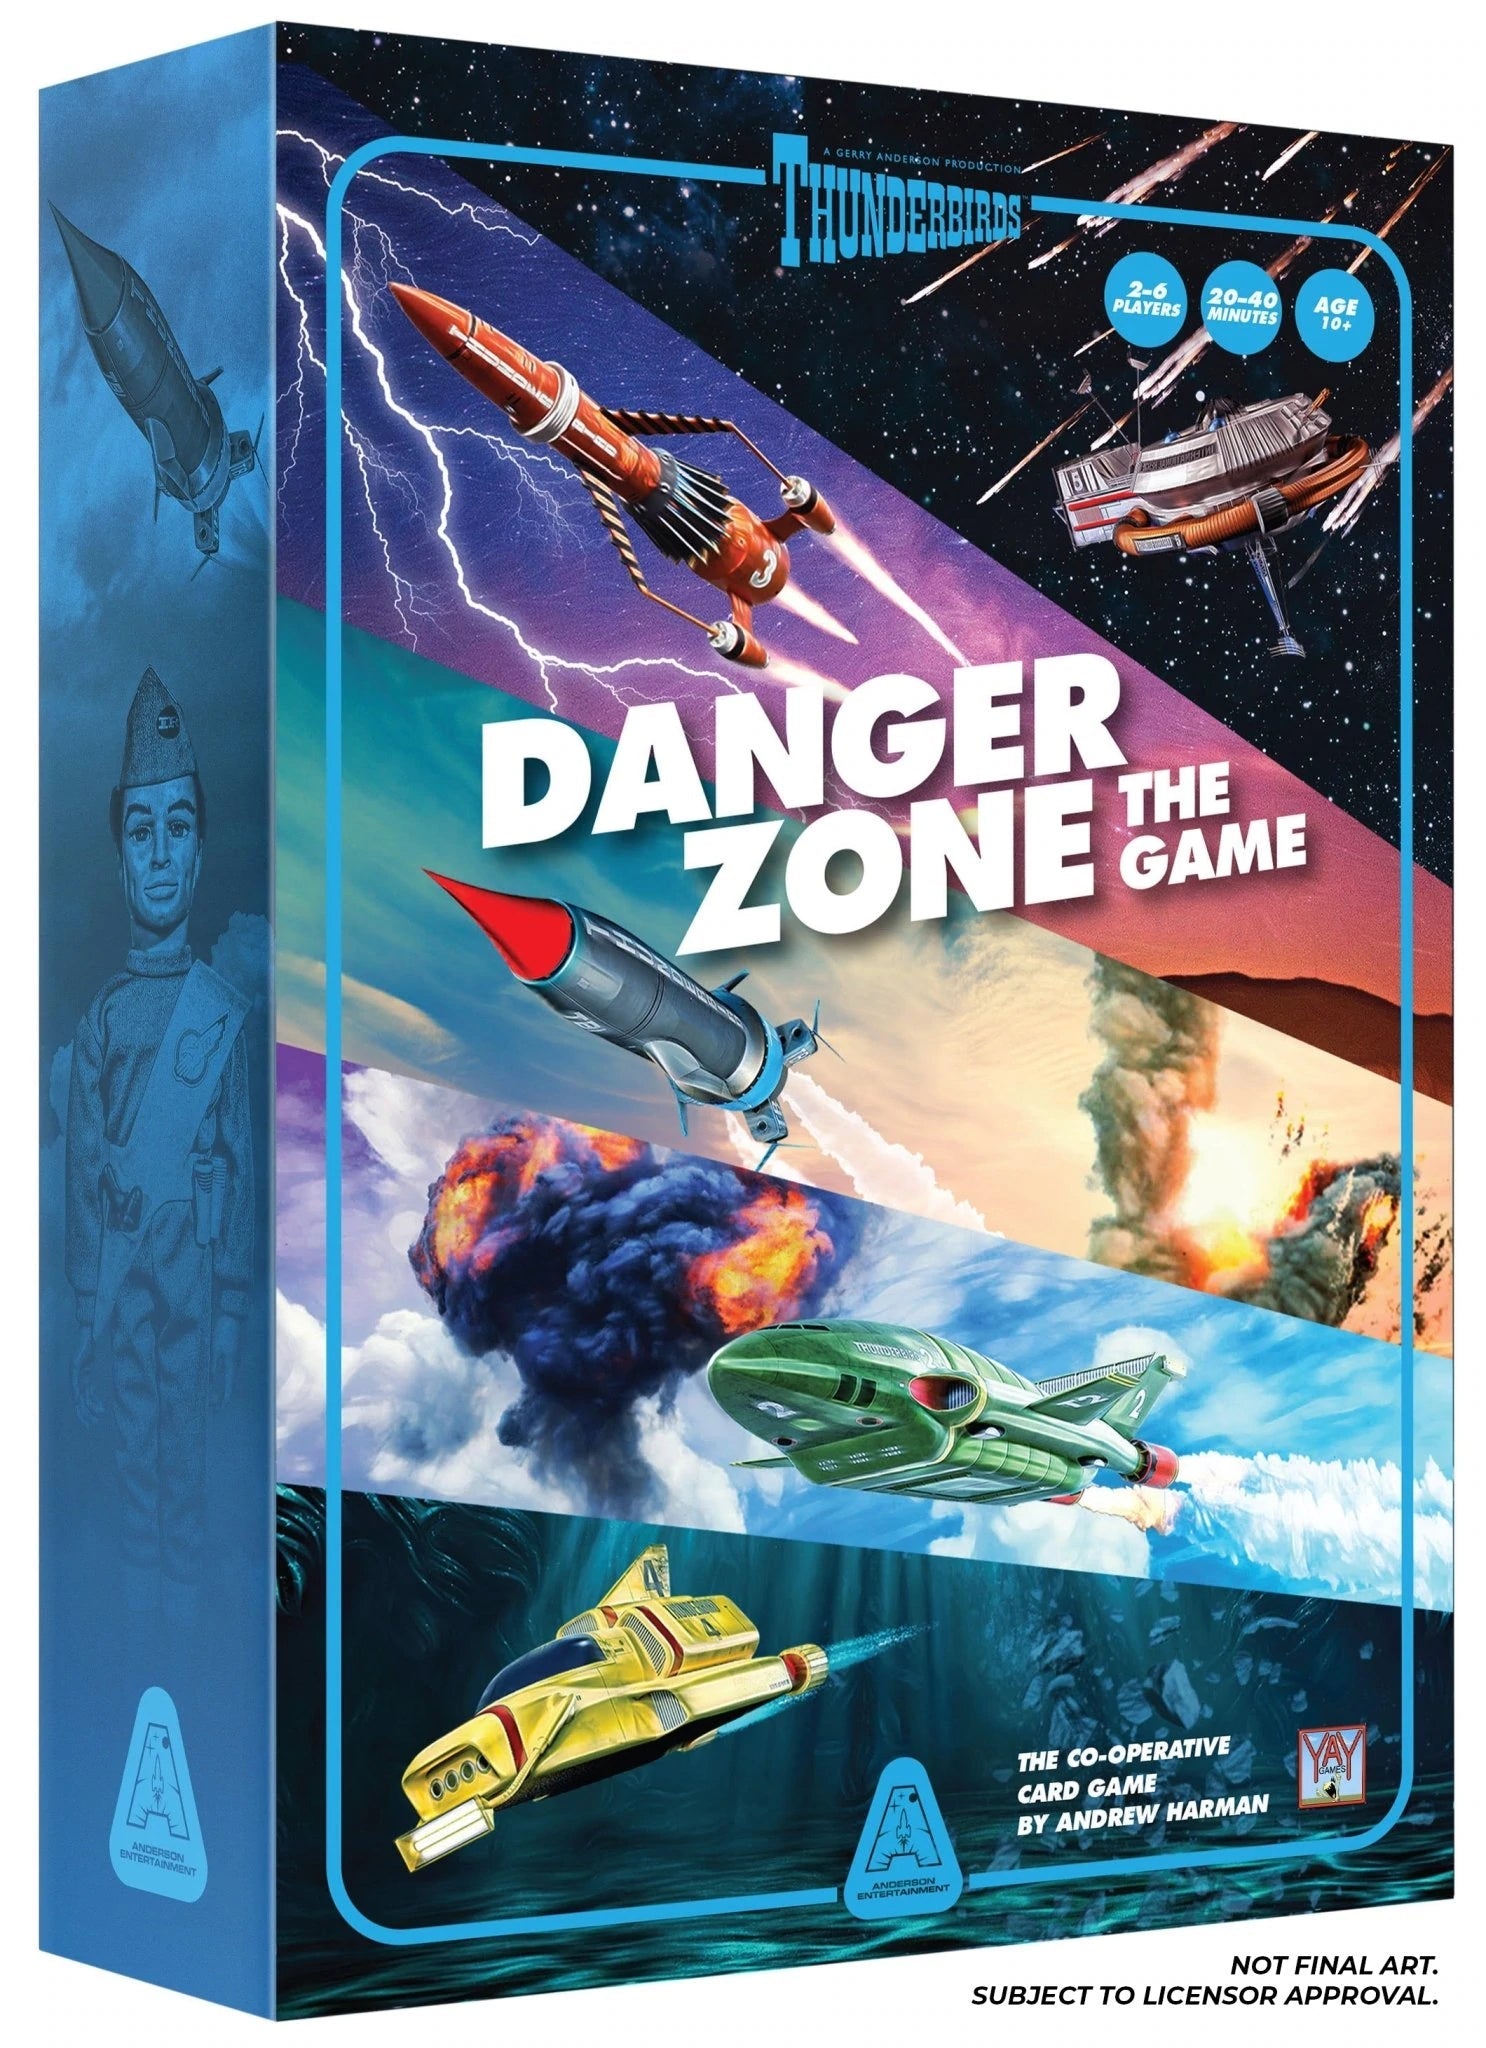 What is Thunderbirds Danger Zone? With Jamie A and Andrew Harman - The Gerry Anderson Store